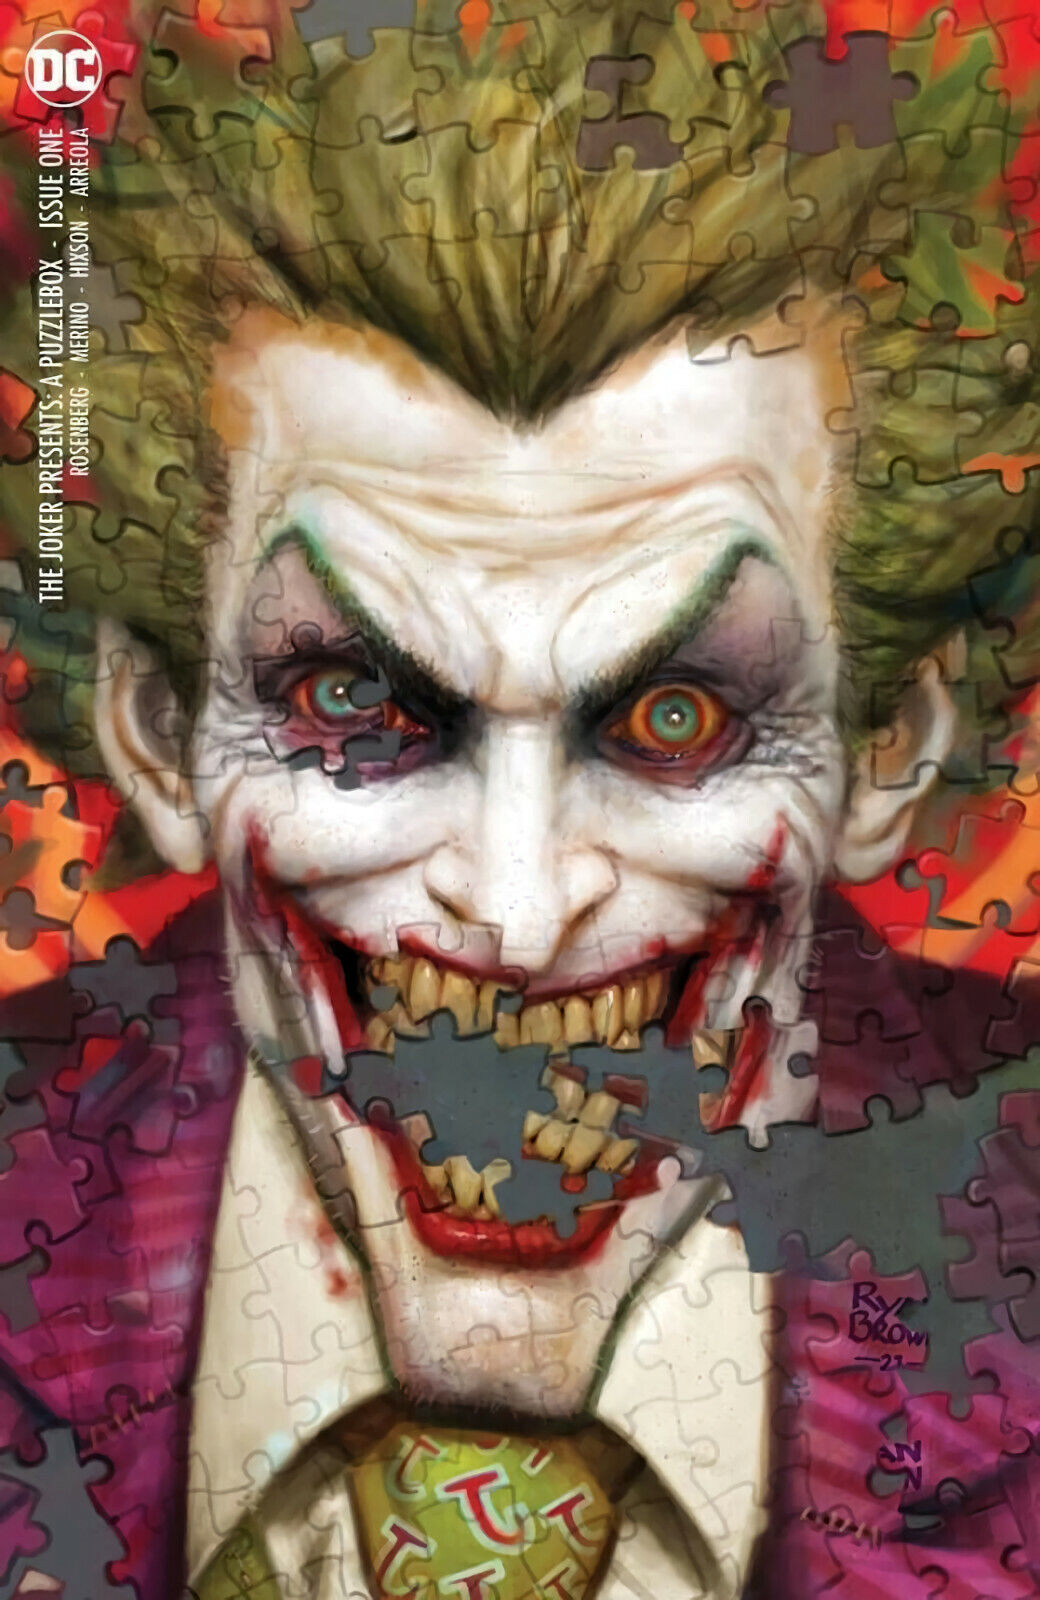 THE JOKER PRESENTS: A PUZZLE BOX #1 (RYAN BROWN EXCLUSIVE MINIMAL TRADE VARIANT)